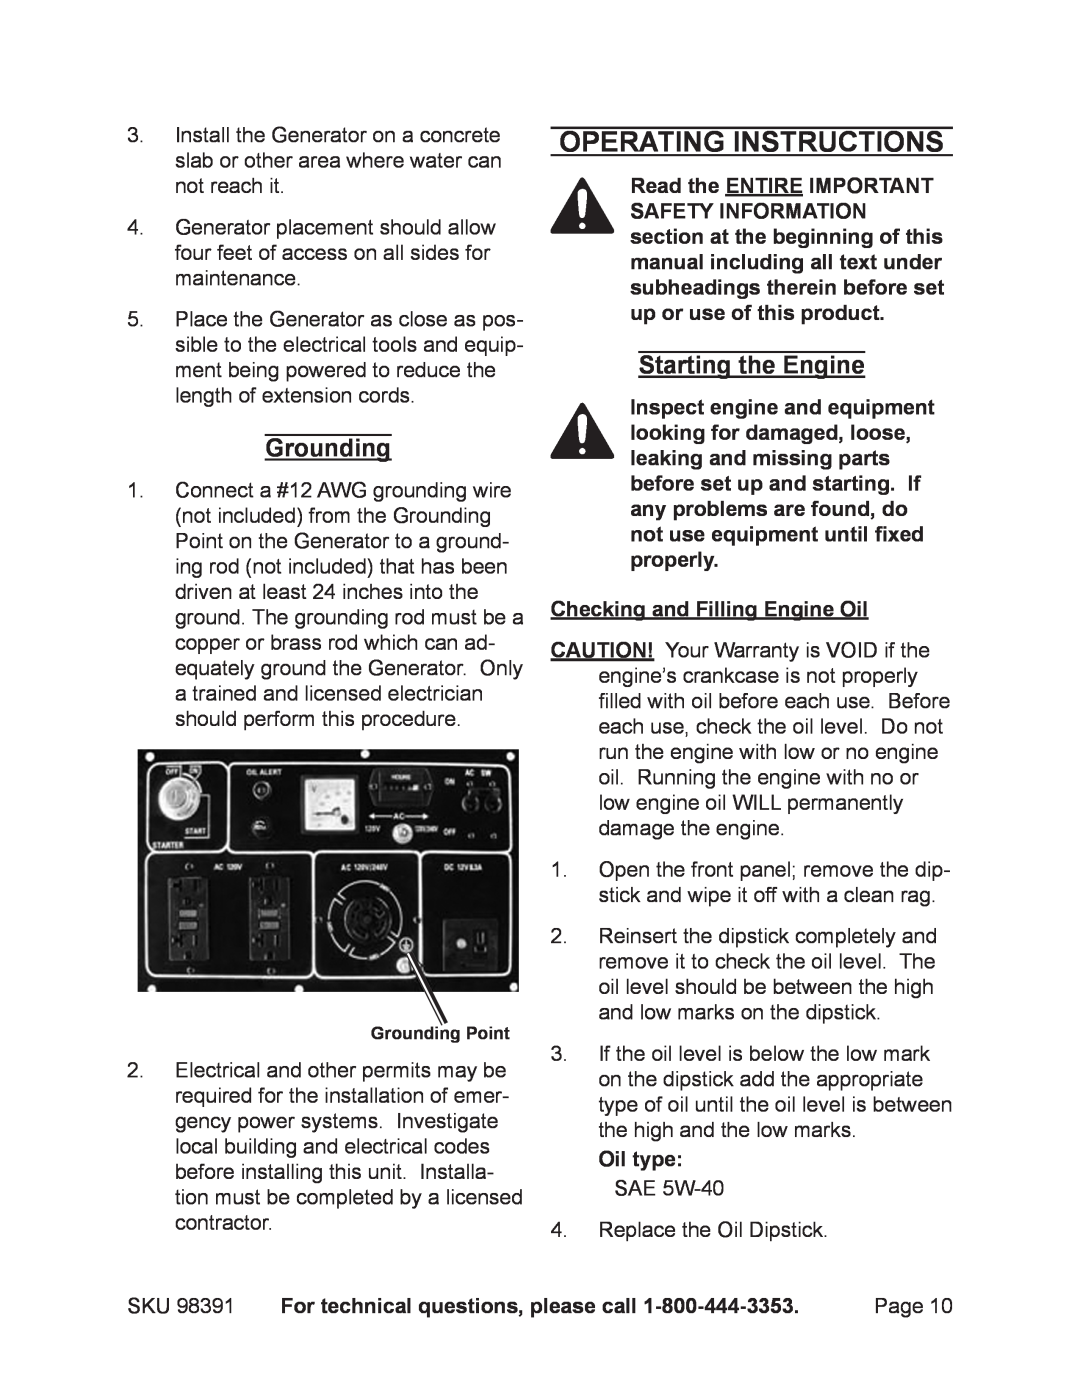 Chicago Electric 98391 manual Operating Instructions, Grounding, Starting the Engine, Checking and Filling Engine Oil 